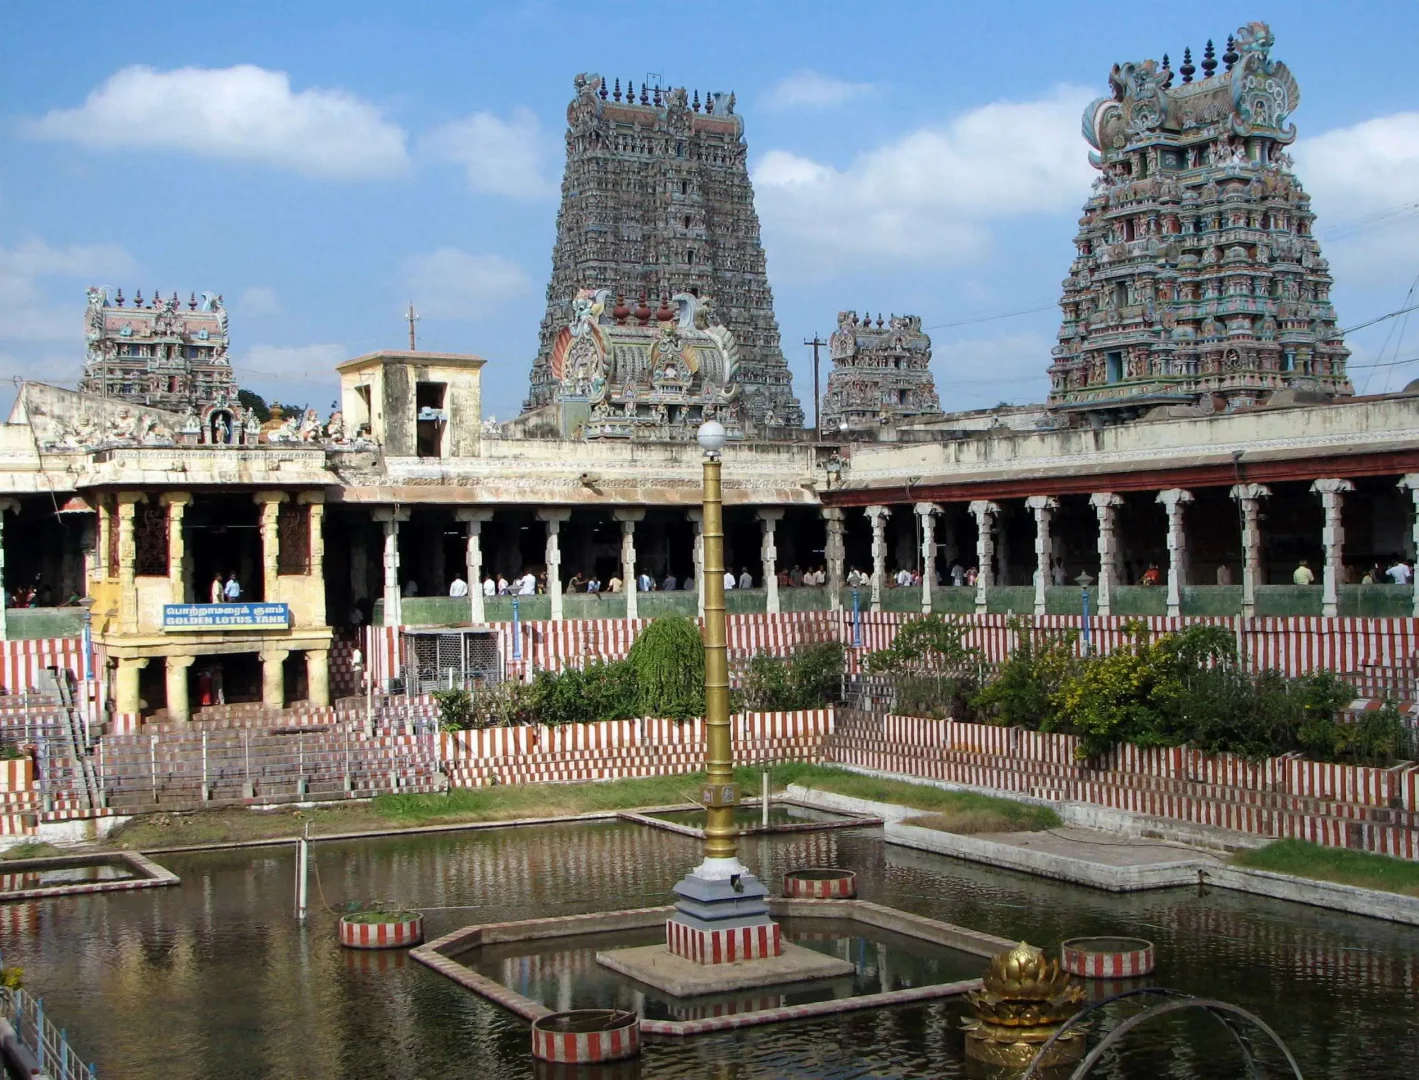 The Meenakshi Amman Temple is an awe-inspiring representation of Dravidian architecture. This temple complex is dedicated to Goddess Meenakshi and Lord Sundareswarar and is renowned for its towering gopurams (entrance towers) adorned with thousands of colorful sculptures depicting mythological tales.